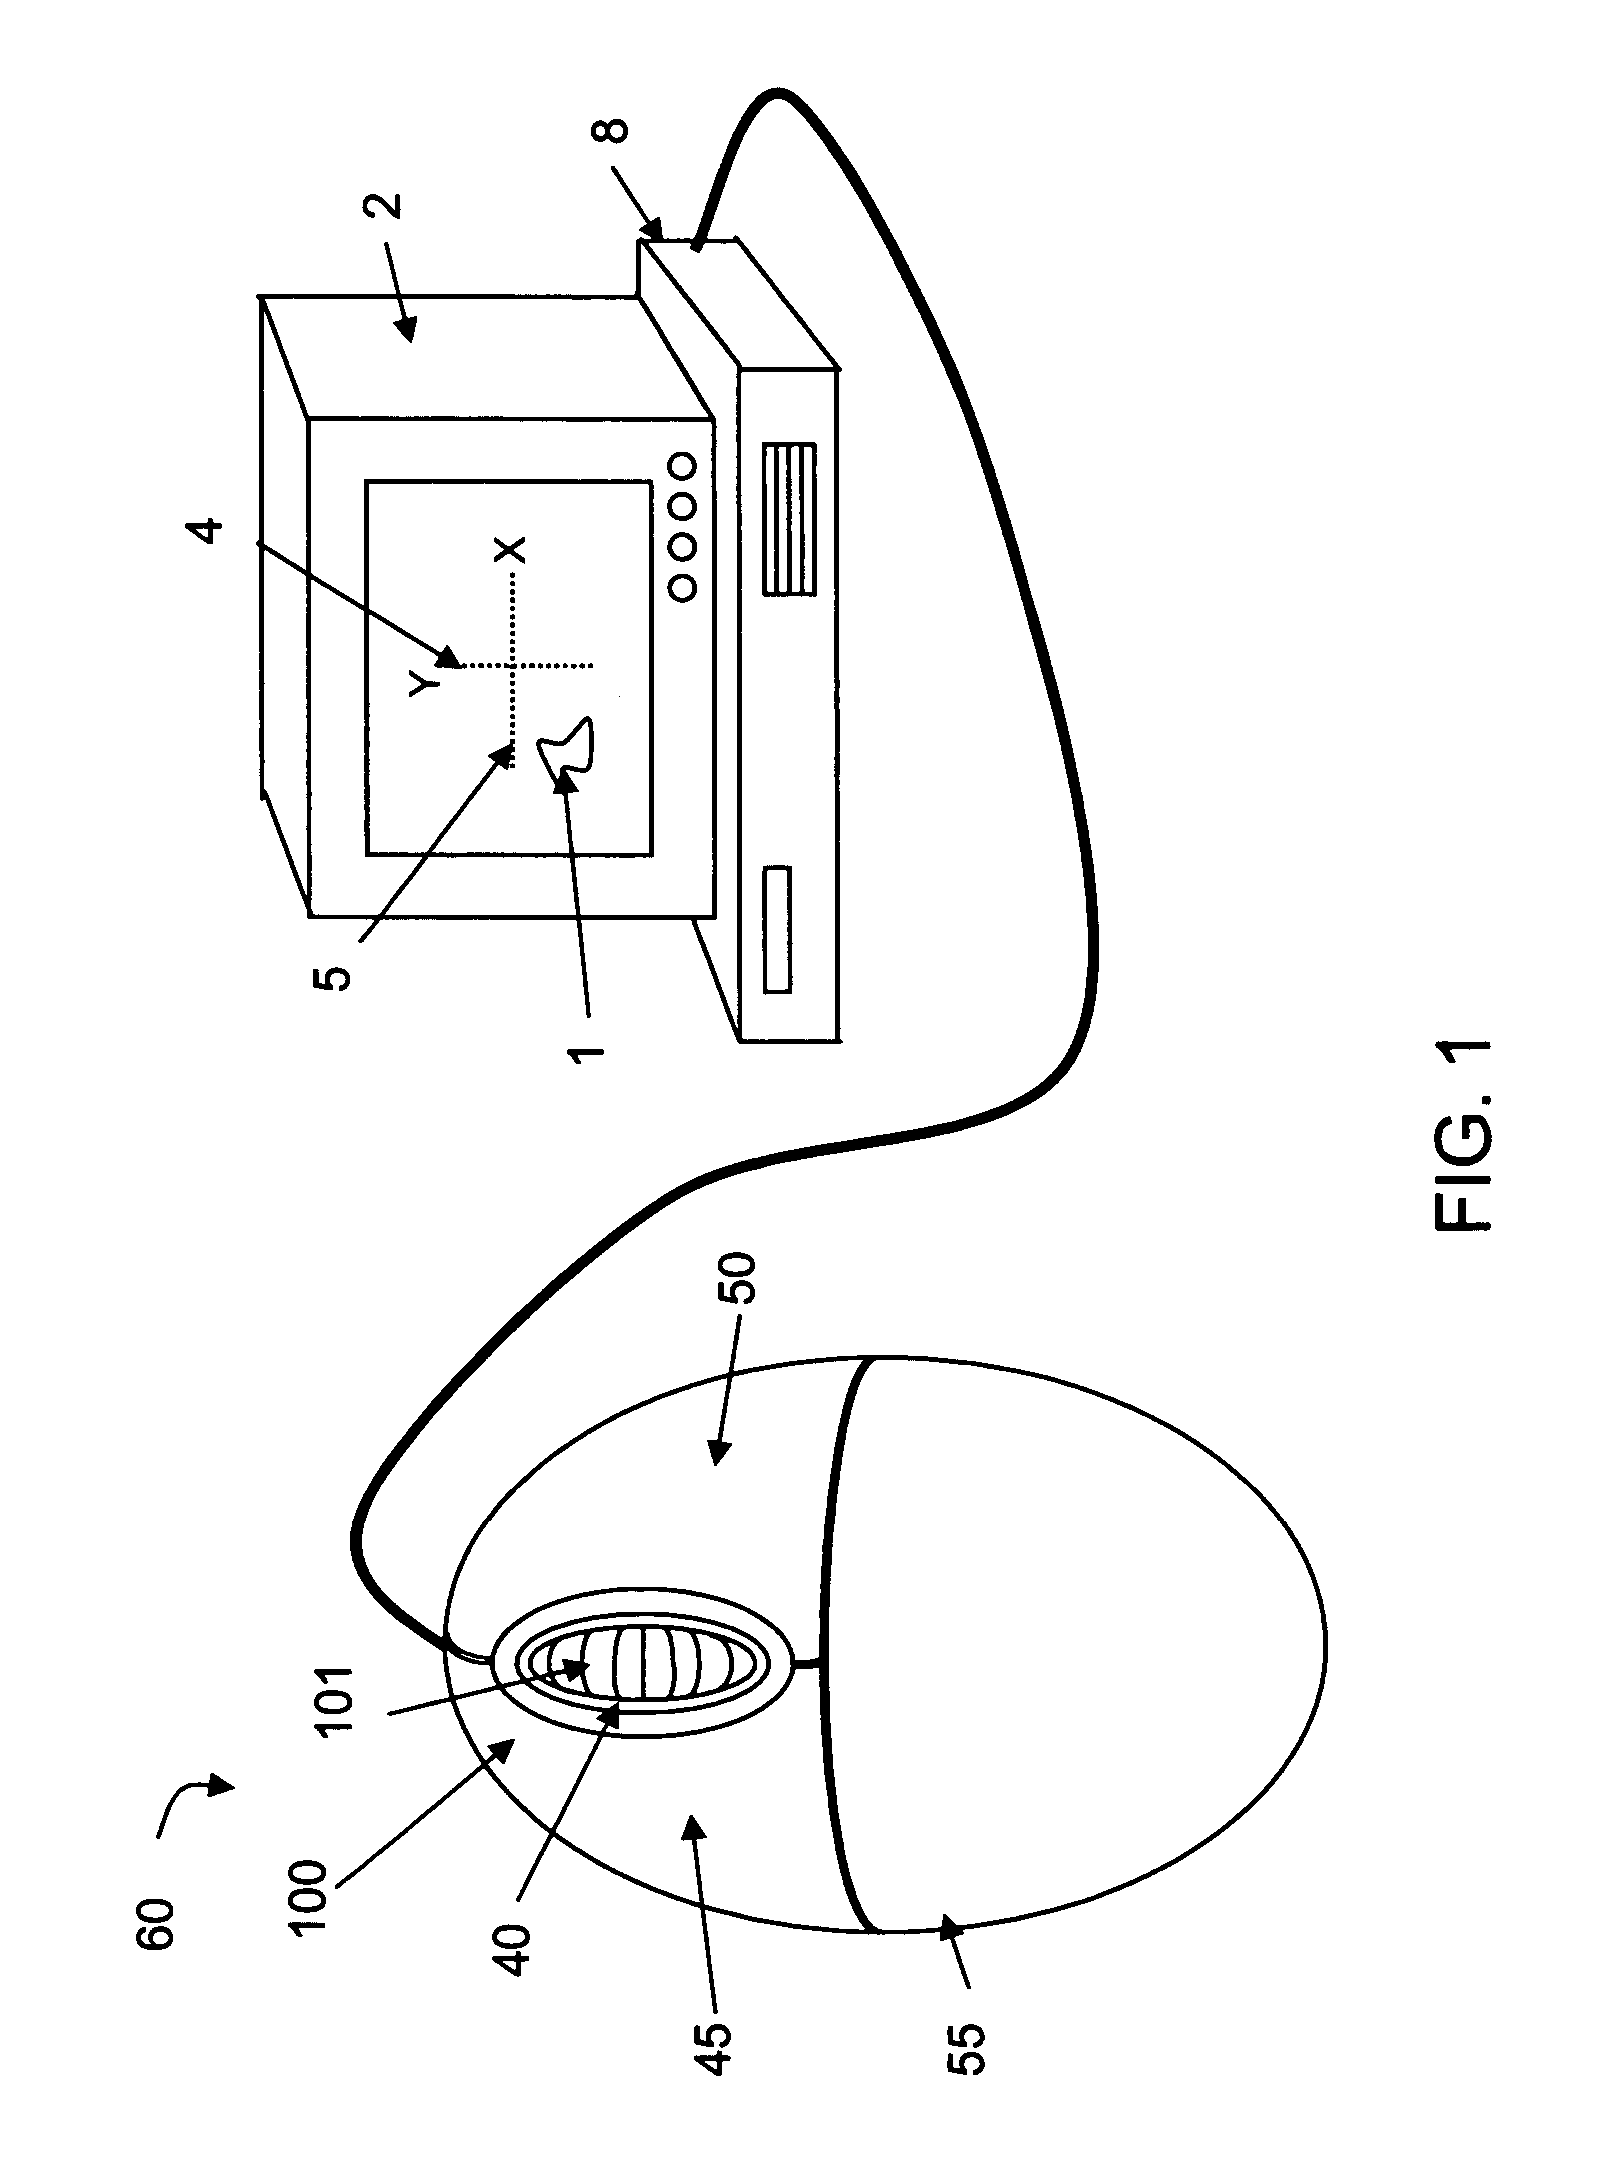 Input device including a scroll wheel assembly